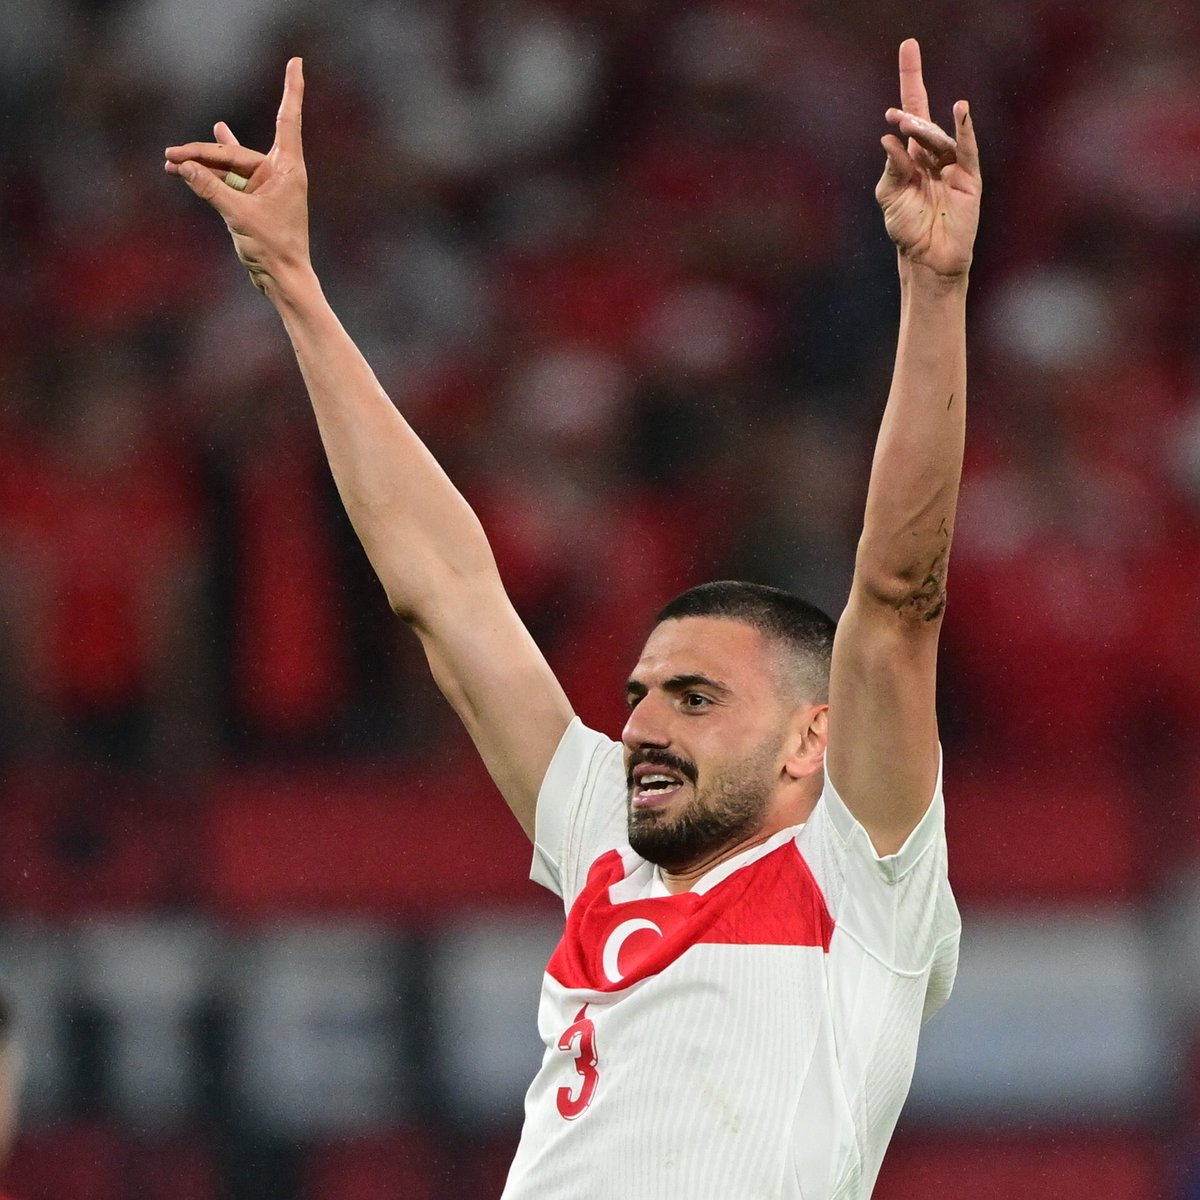 UEFA has launched an investigation against Merih Demiral for flashing Turkish nationalist Grey Wolves sign last night during a game with Austria, Turkish media report